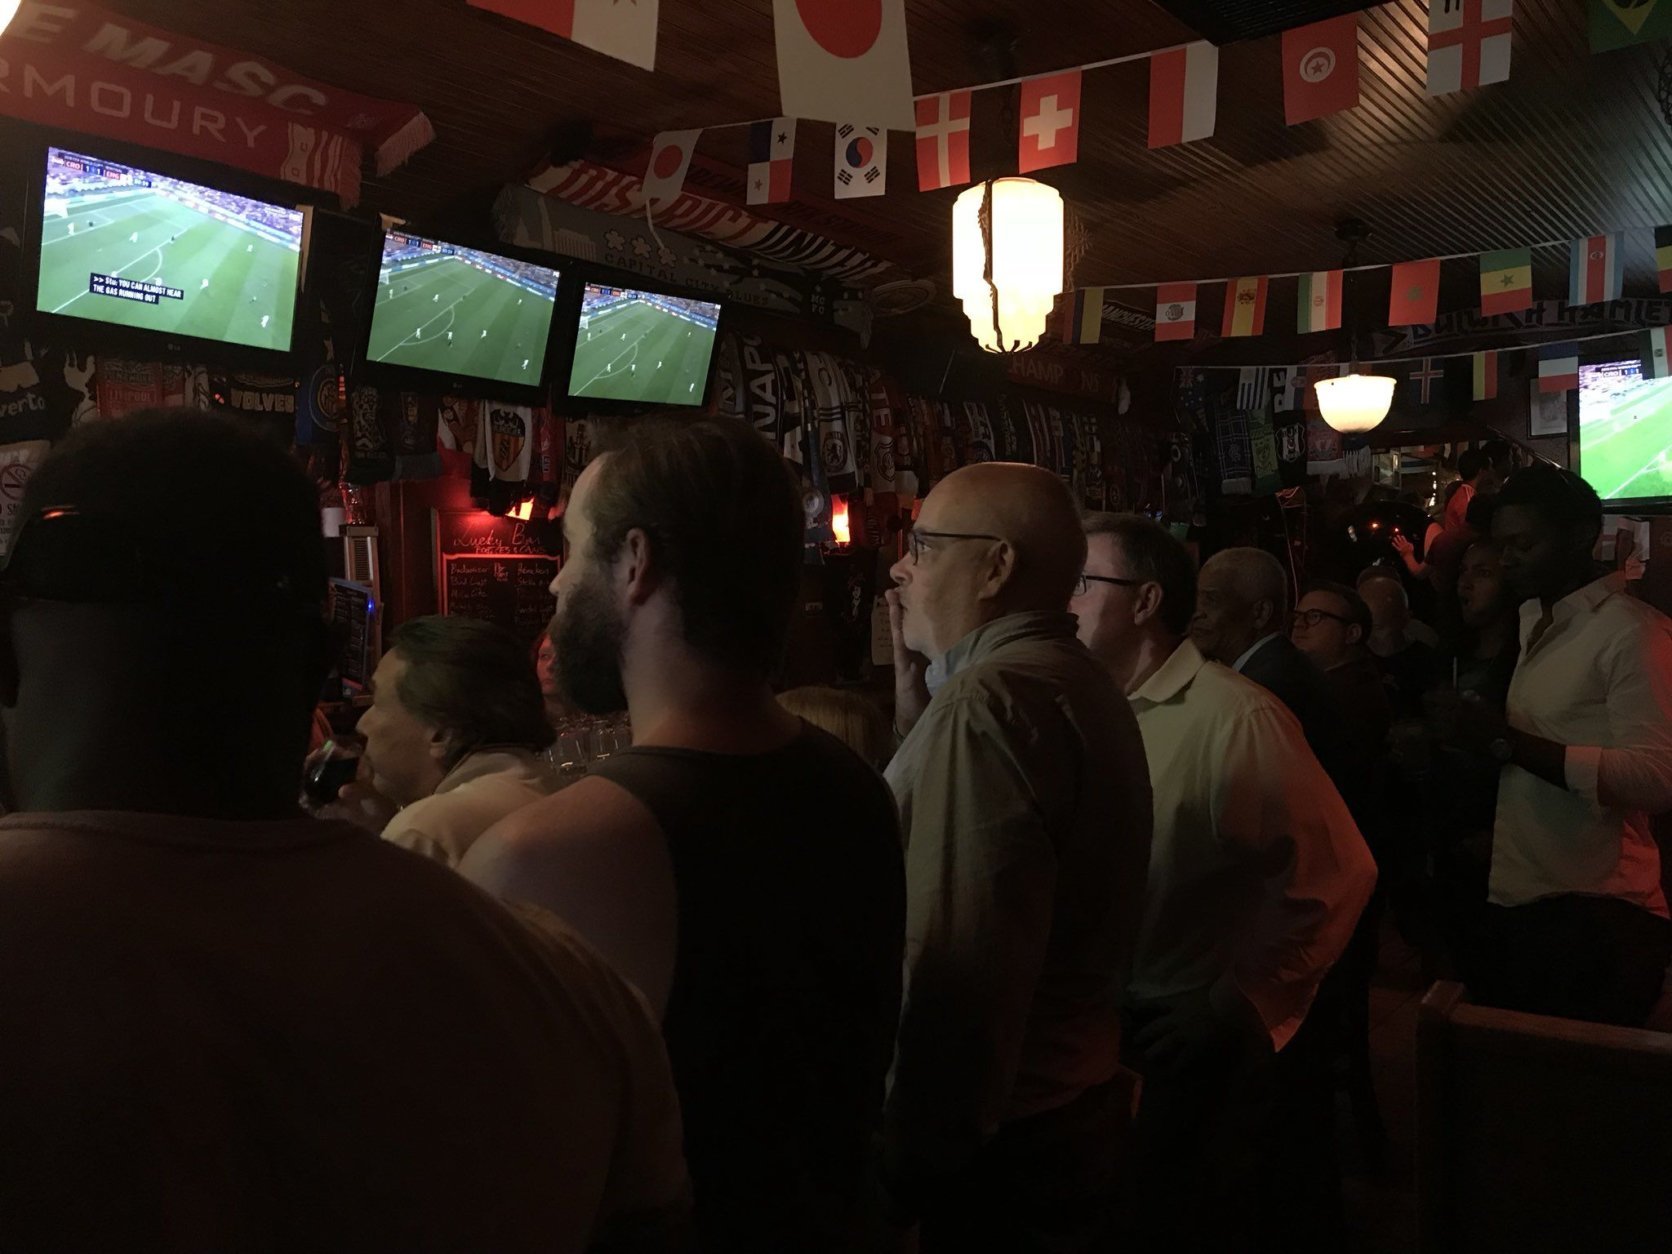 The mood is anxious in Lucky Bar with 10 minutes left in the match. (WTOP/Michelle Basch)